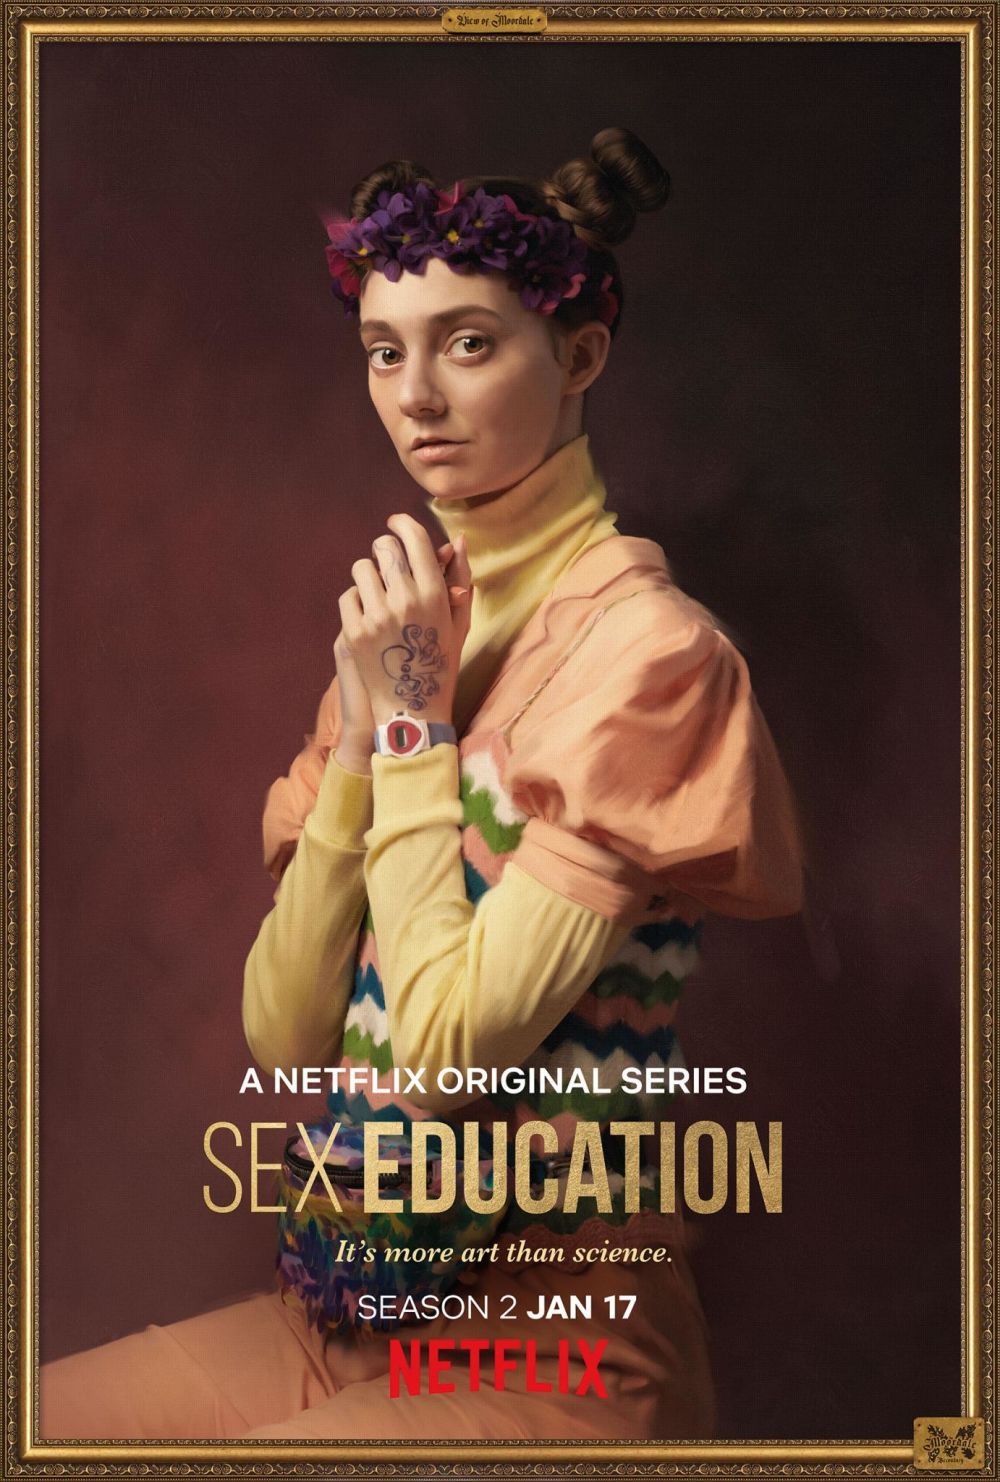 A promotional portrait of Lily from the Netflix series, Sex Education.